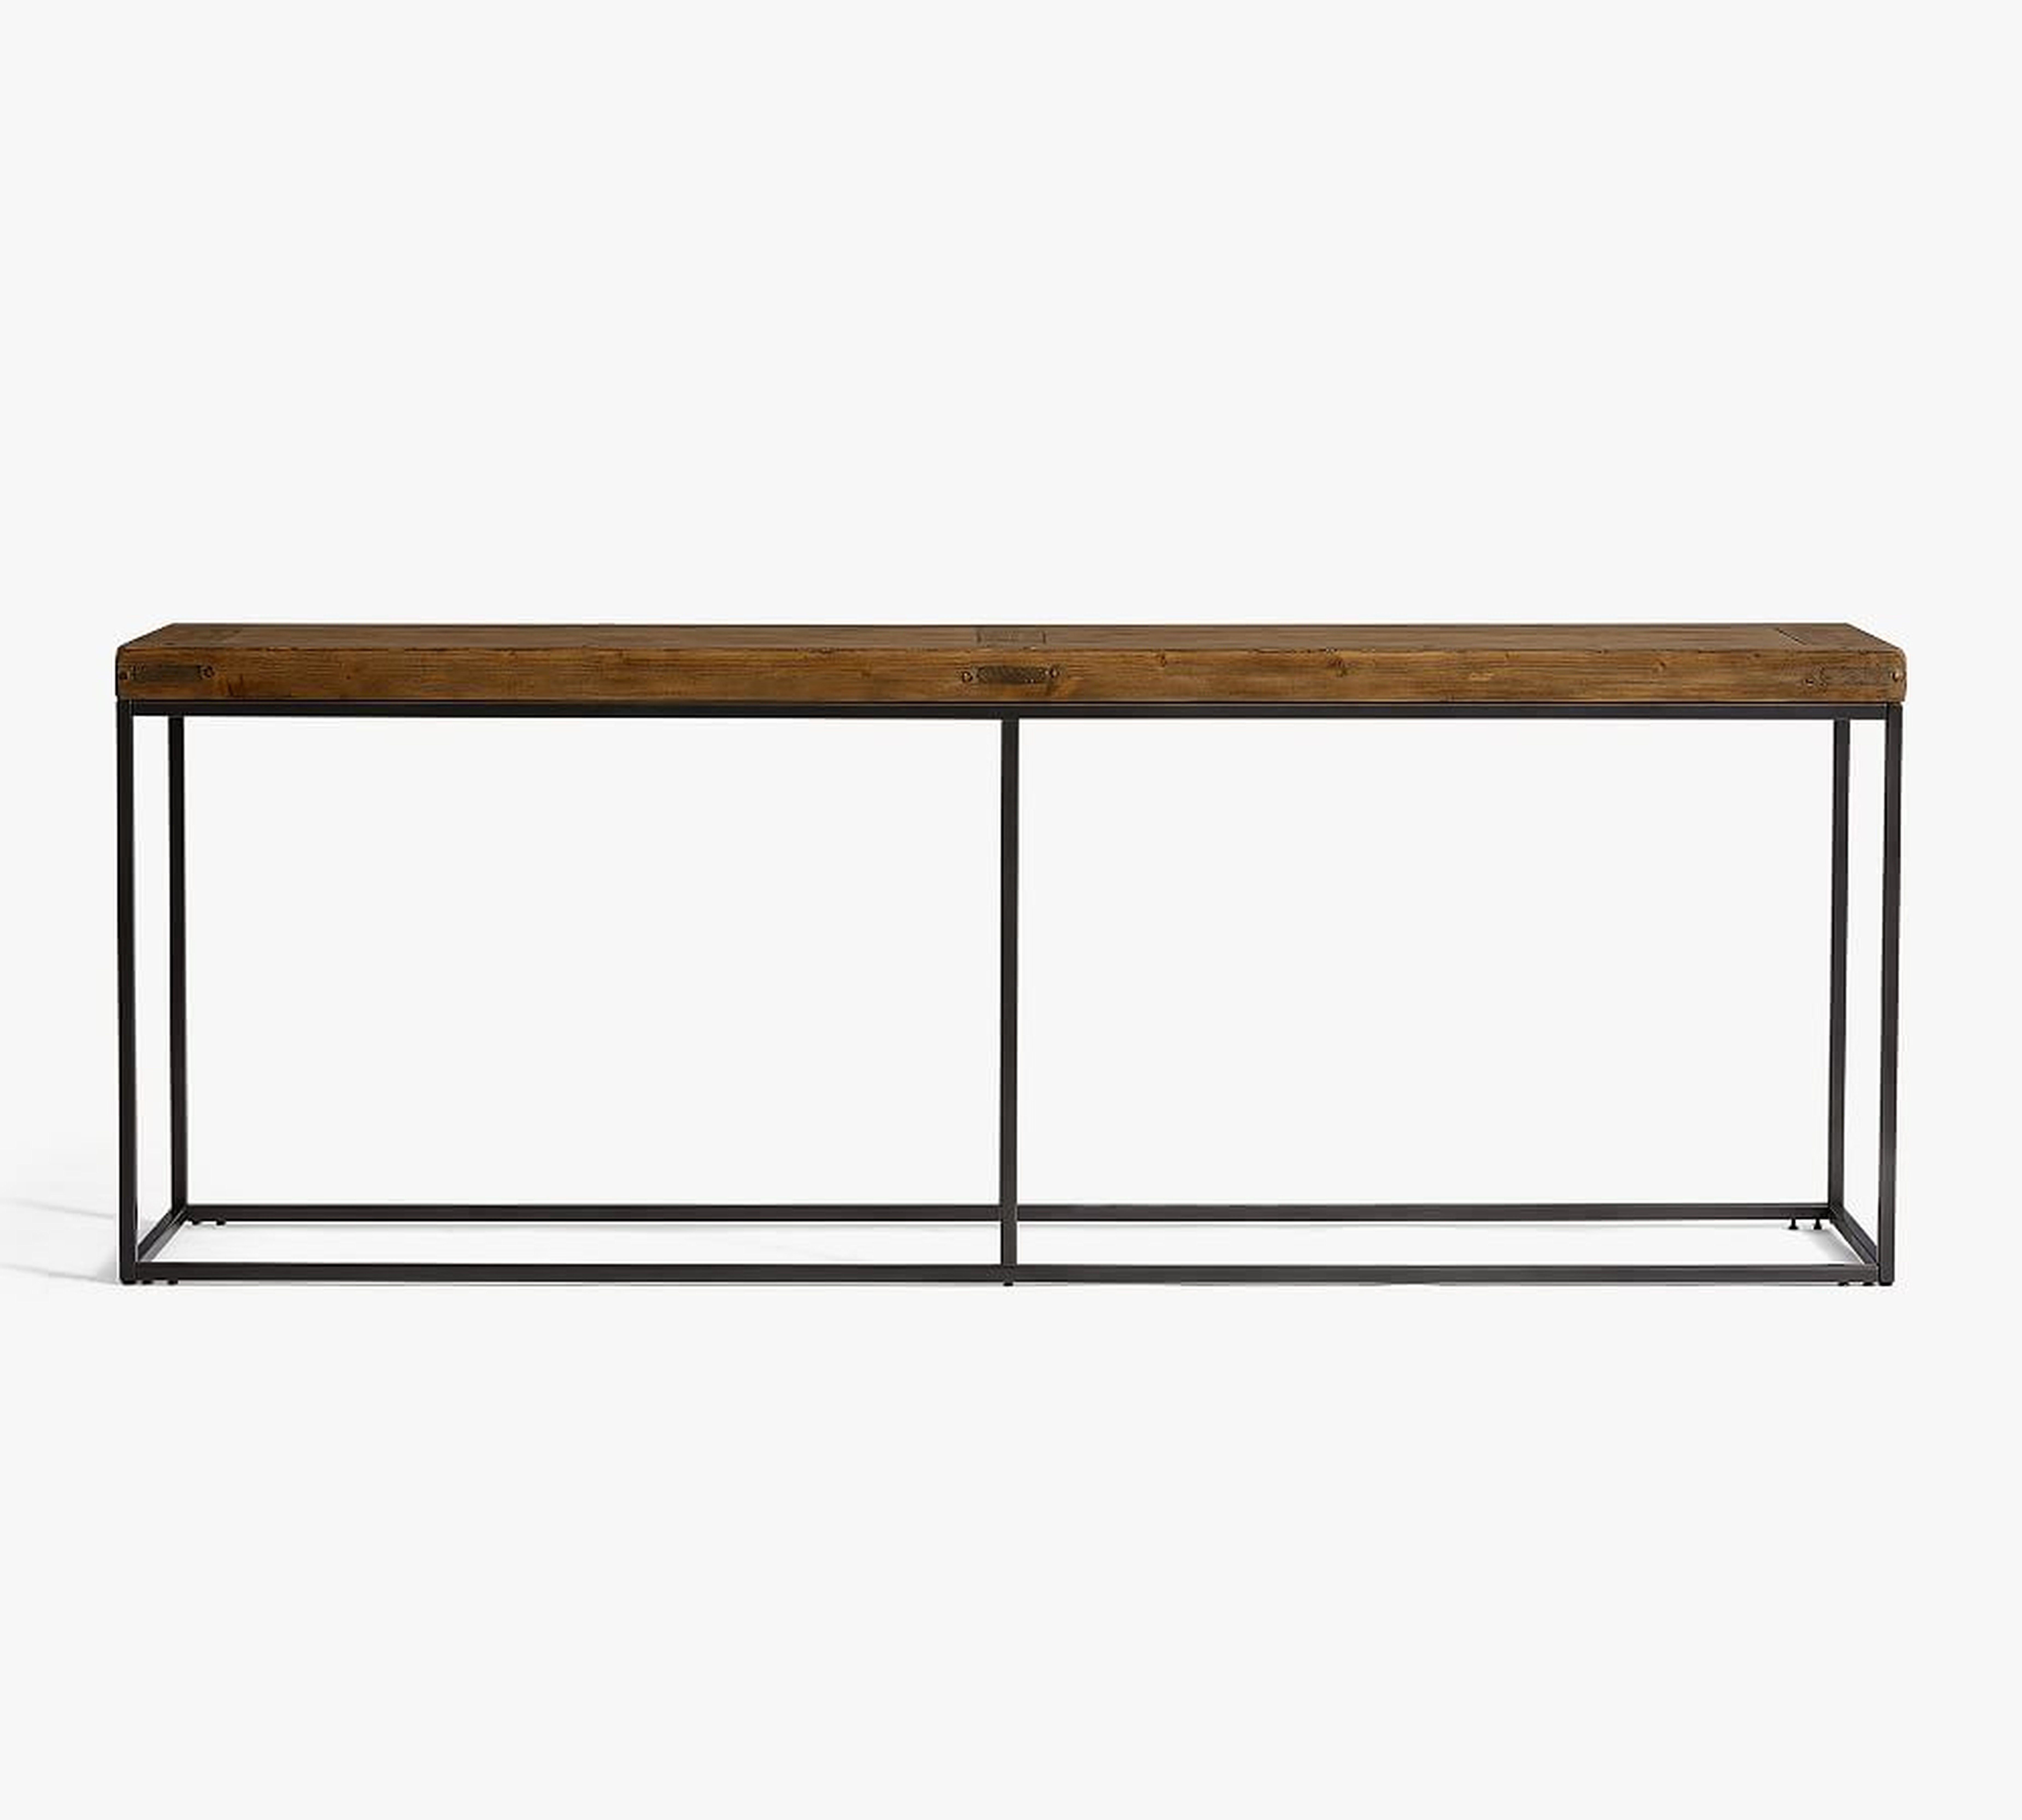 Malcolm 84" Grand Console Table, Glazed Pine - Pottery Barn